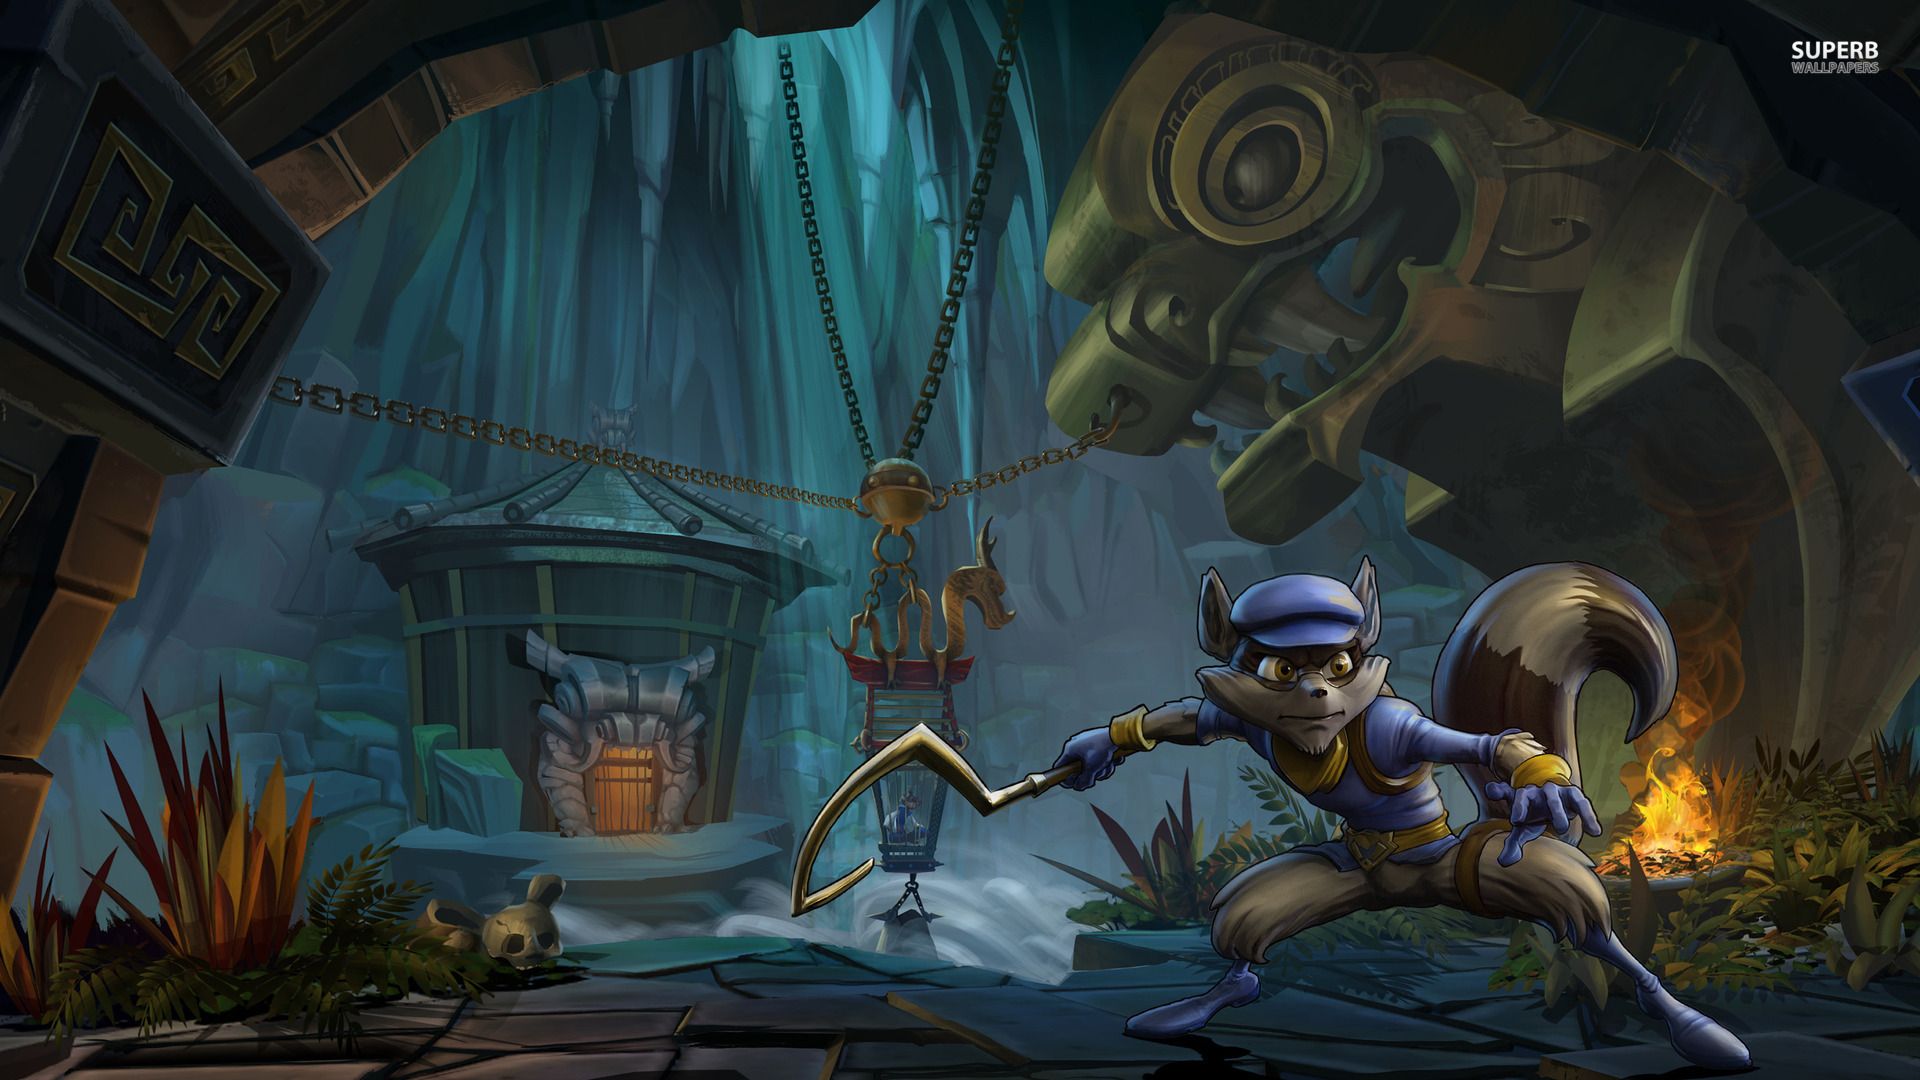 Sly Cooper Wallpapers 1920x1080